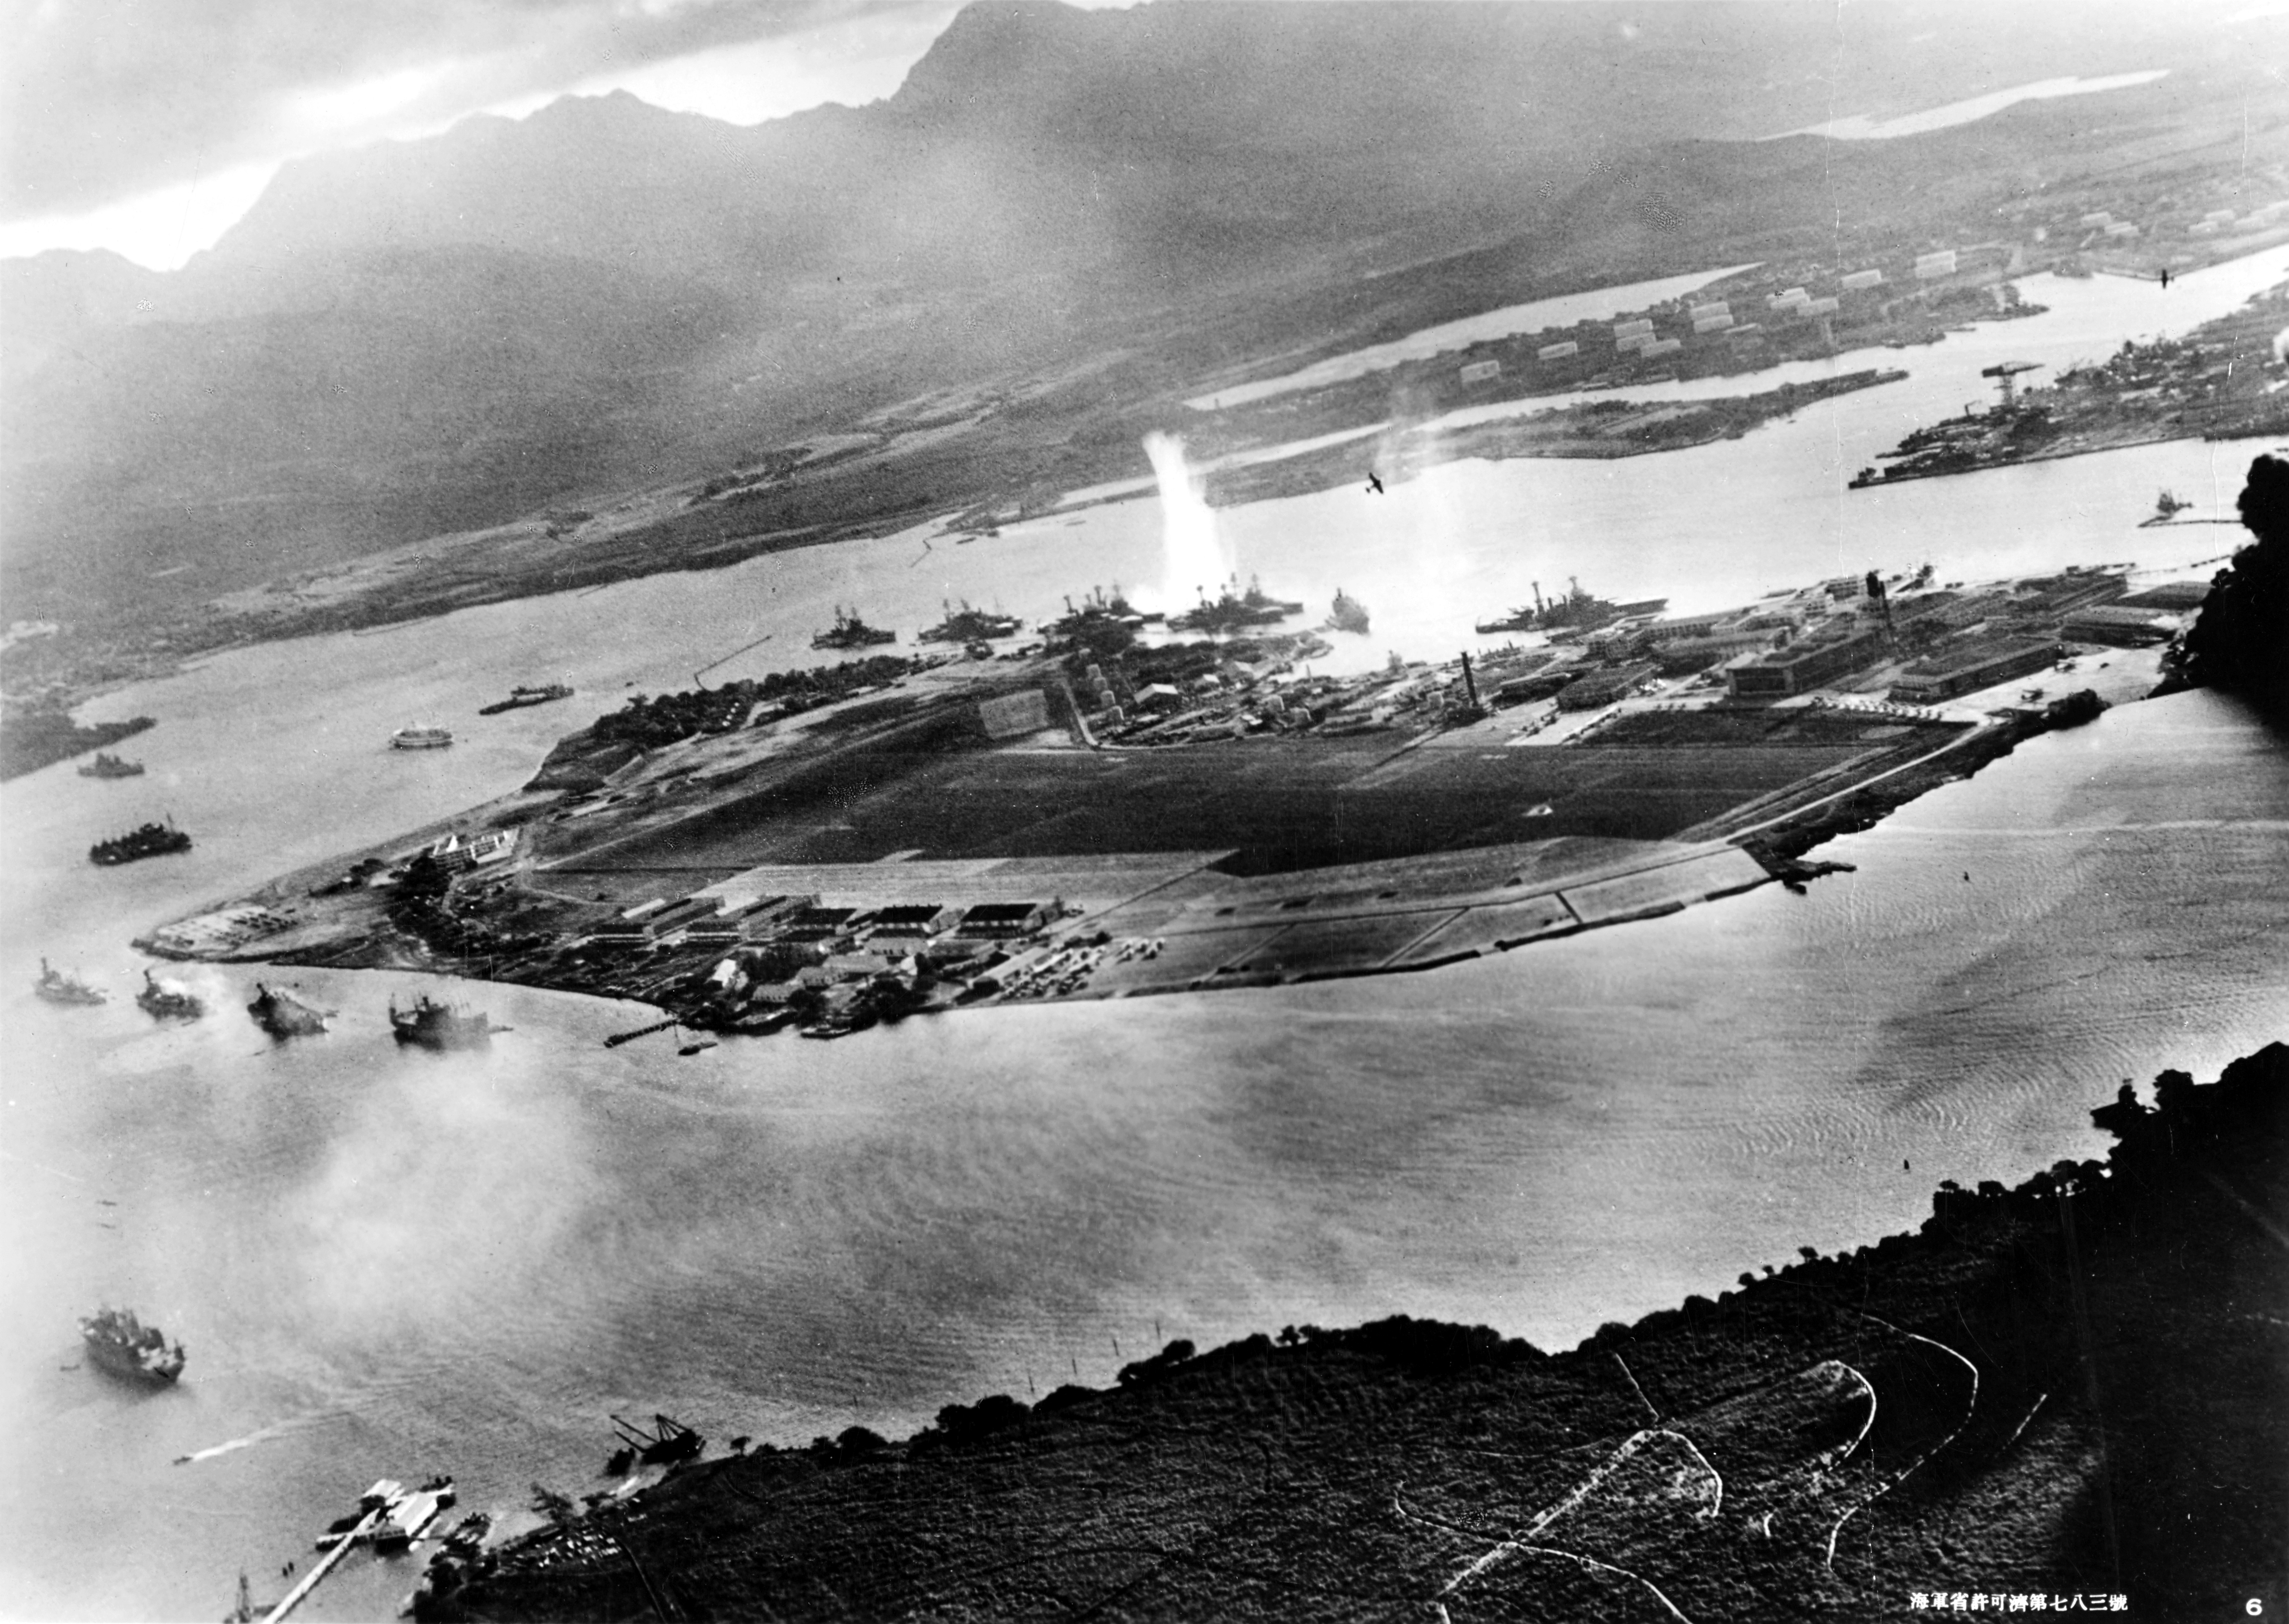 Photograph taken from a Japanese plane during the torpedo attack on ships moored on both sides of Ford Island shortly after the beginning of the Pearl Harbor attack. A torpedo has just hit USS West Virginia on the far side of Ford Island (center).